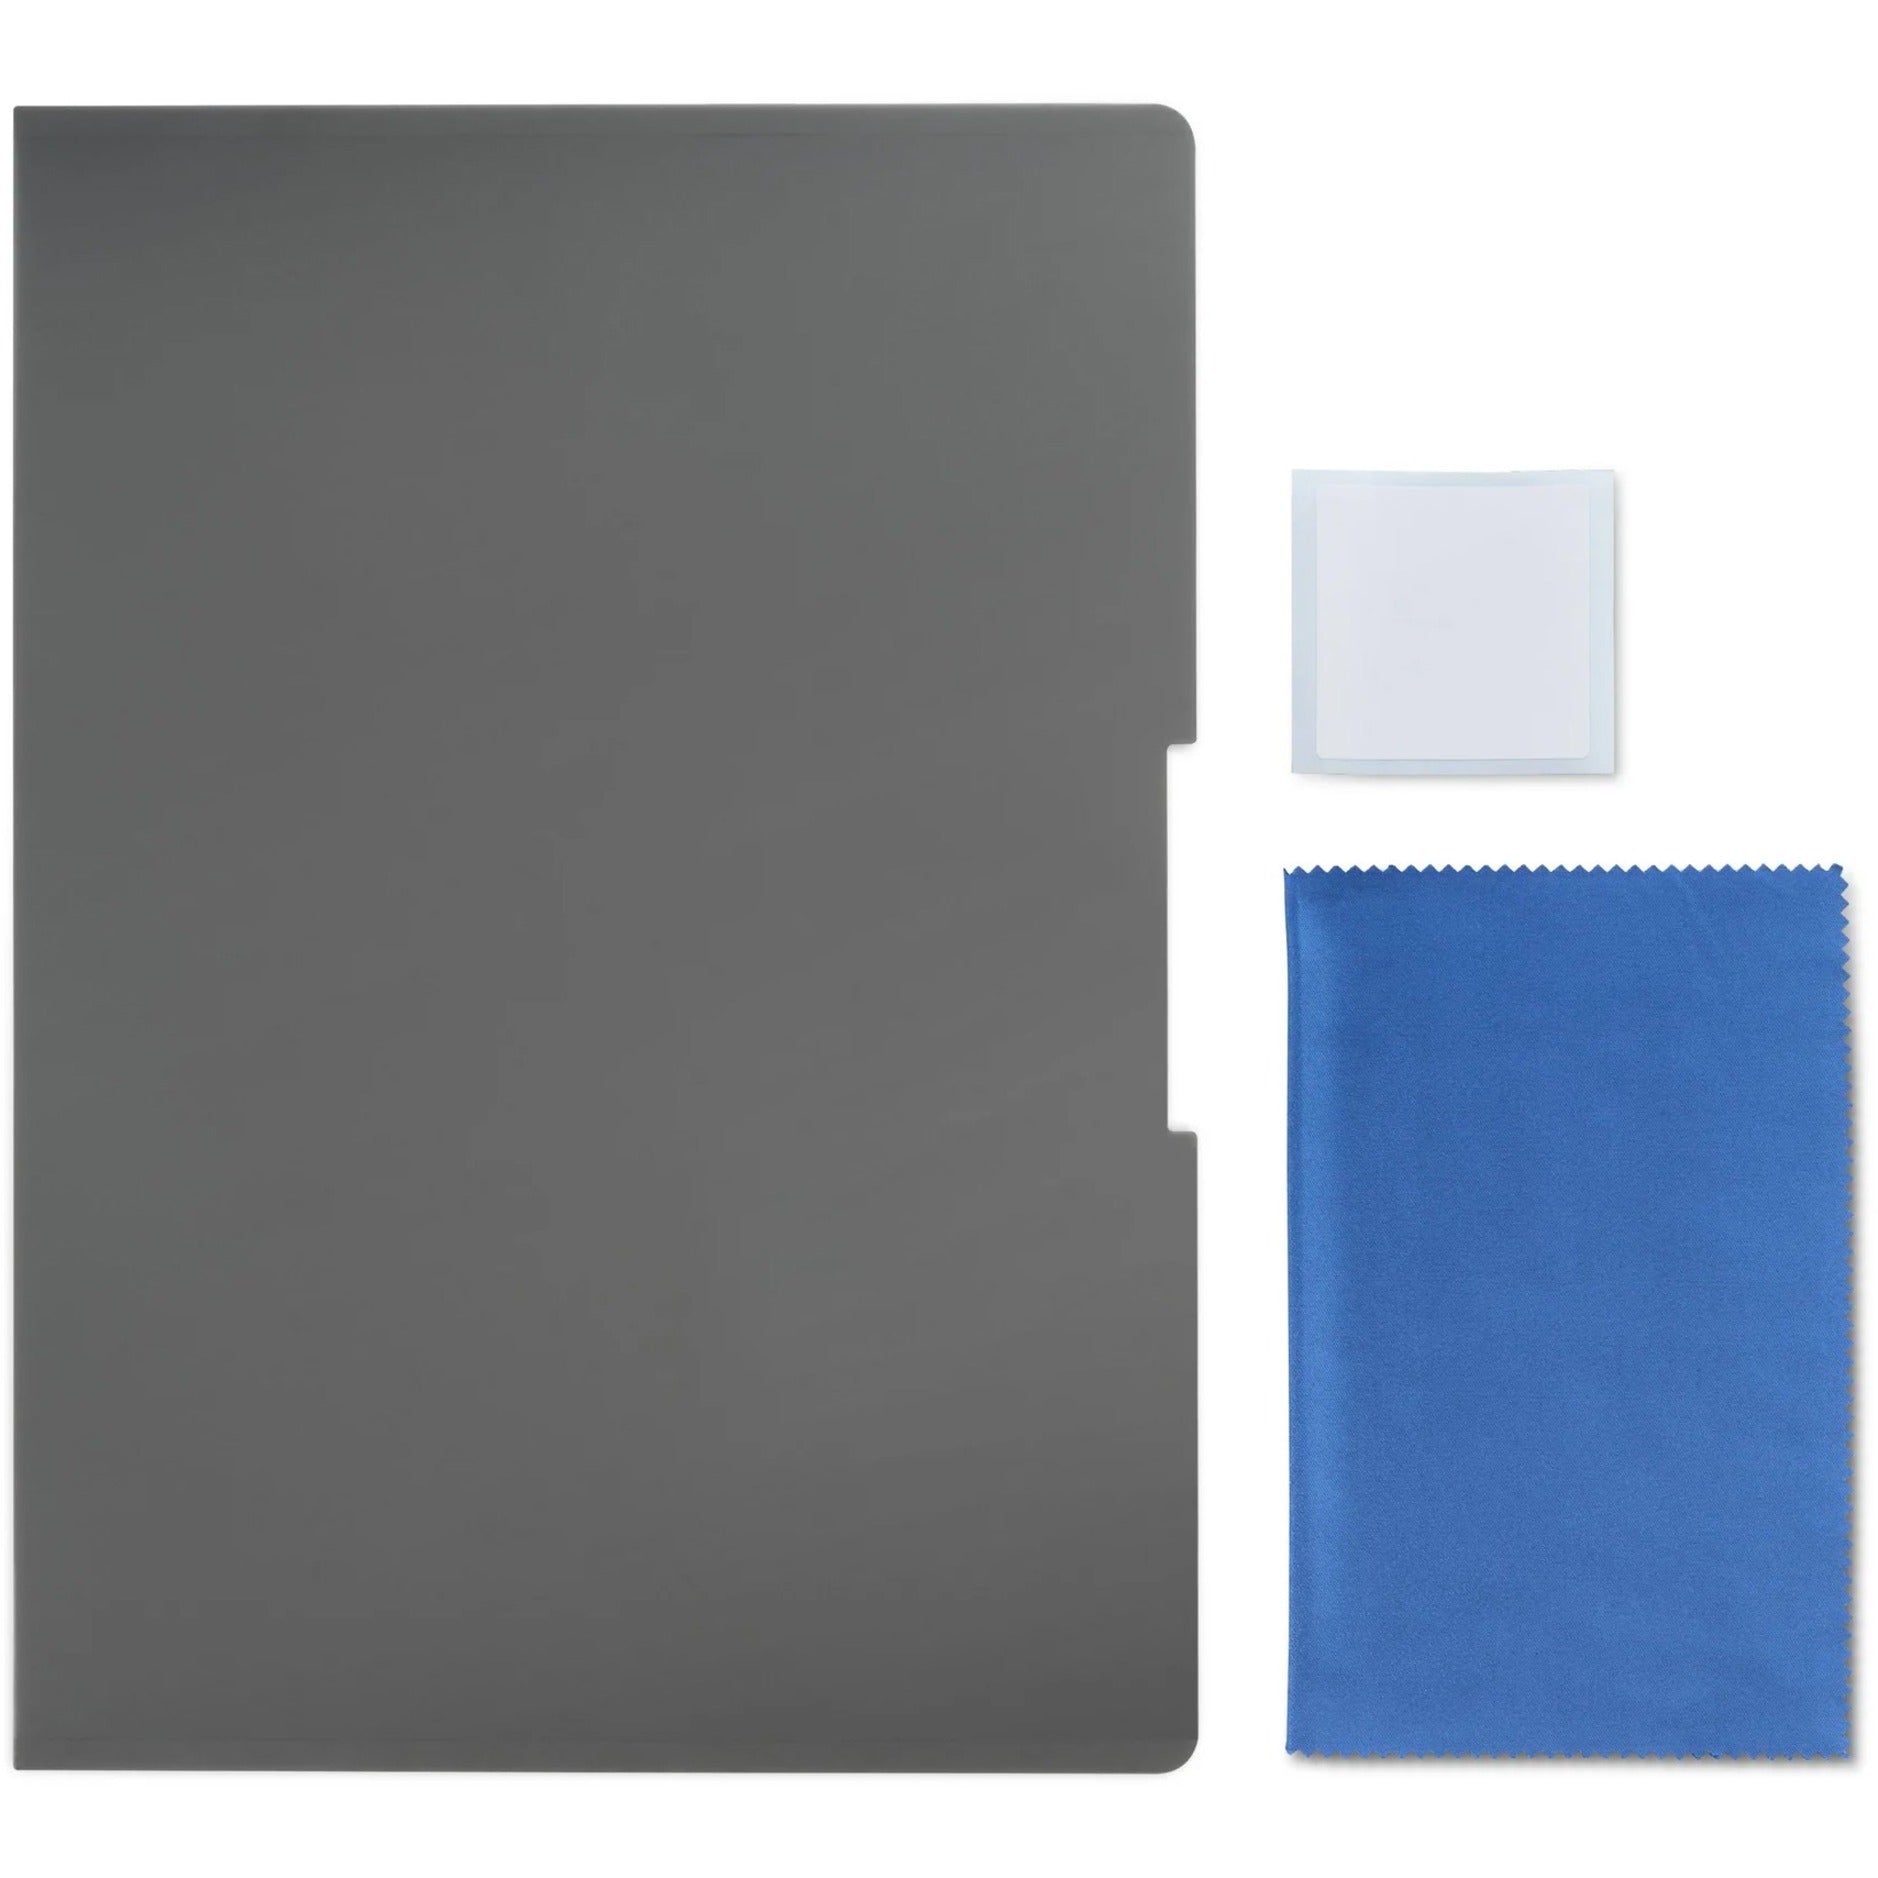 Kensington K54250WW SA124 Privacy Screen for Surface Laptop Go, 3 Year Warranty, Easy to Remove, Blue Light Reduction